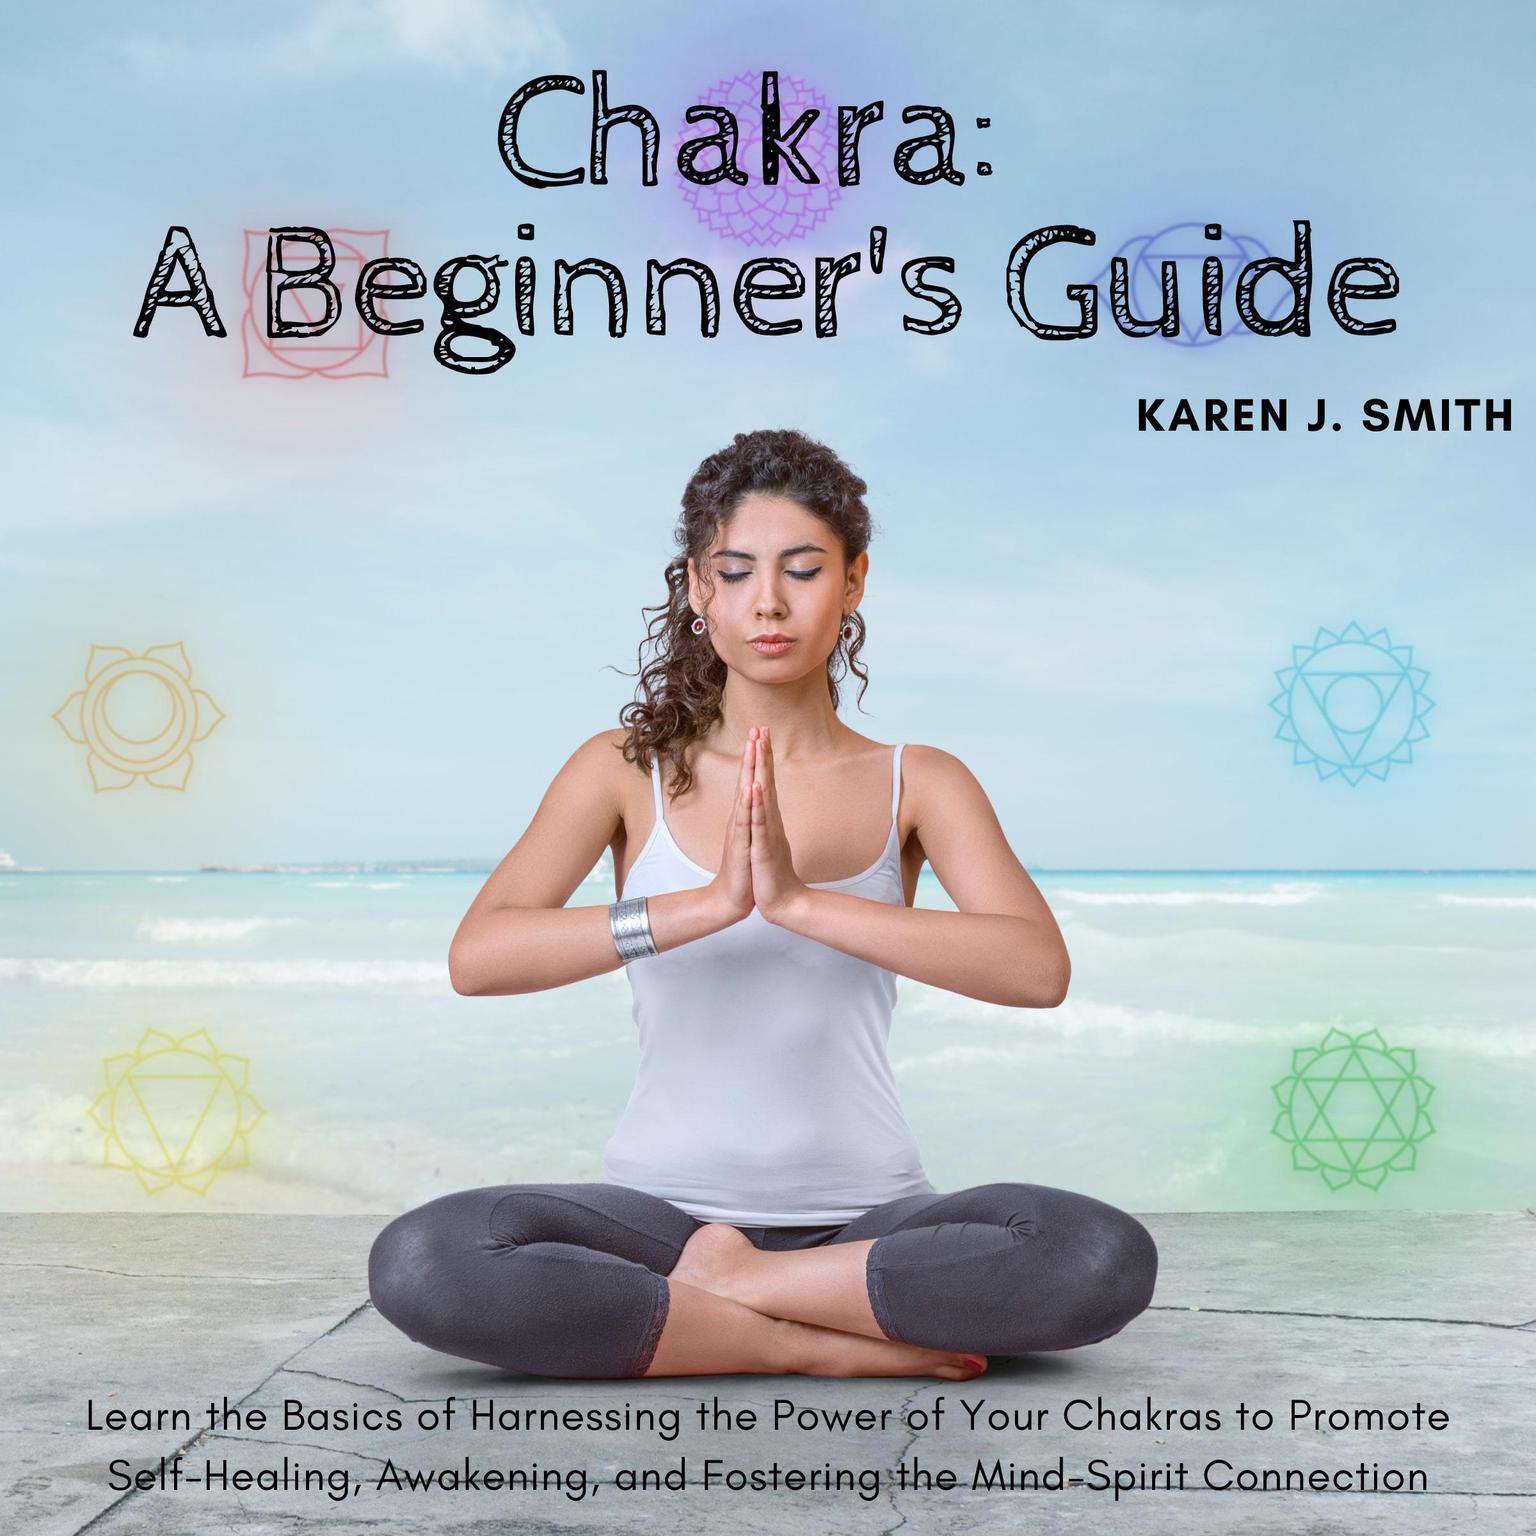 Chakra: A Beginners Guide: Learn the Basics of Harnessing the Power of Your Chakras to Promote Self-Healing, Awakening, and Fostering the Mind-Spirit Connection Audiobook, by Karen J Smith